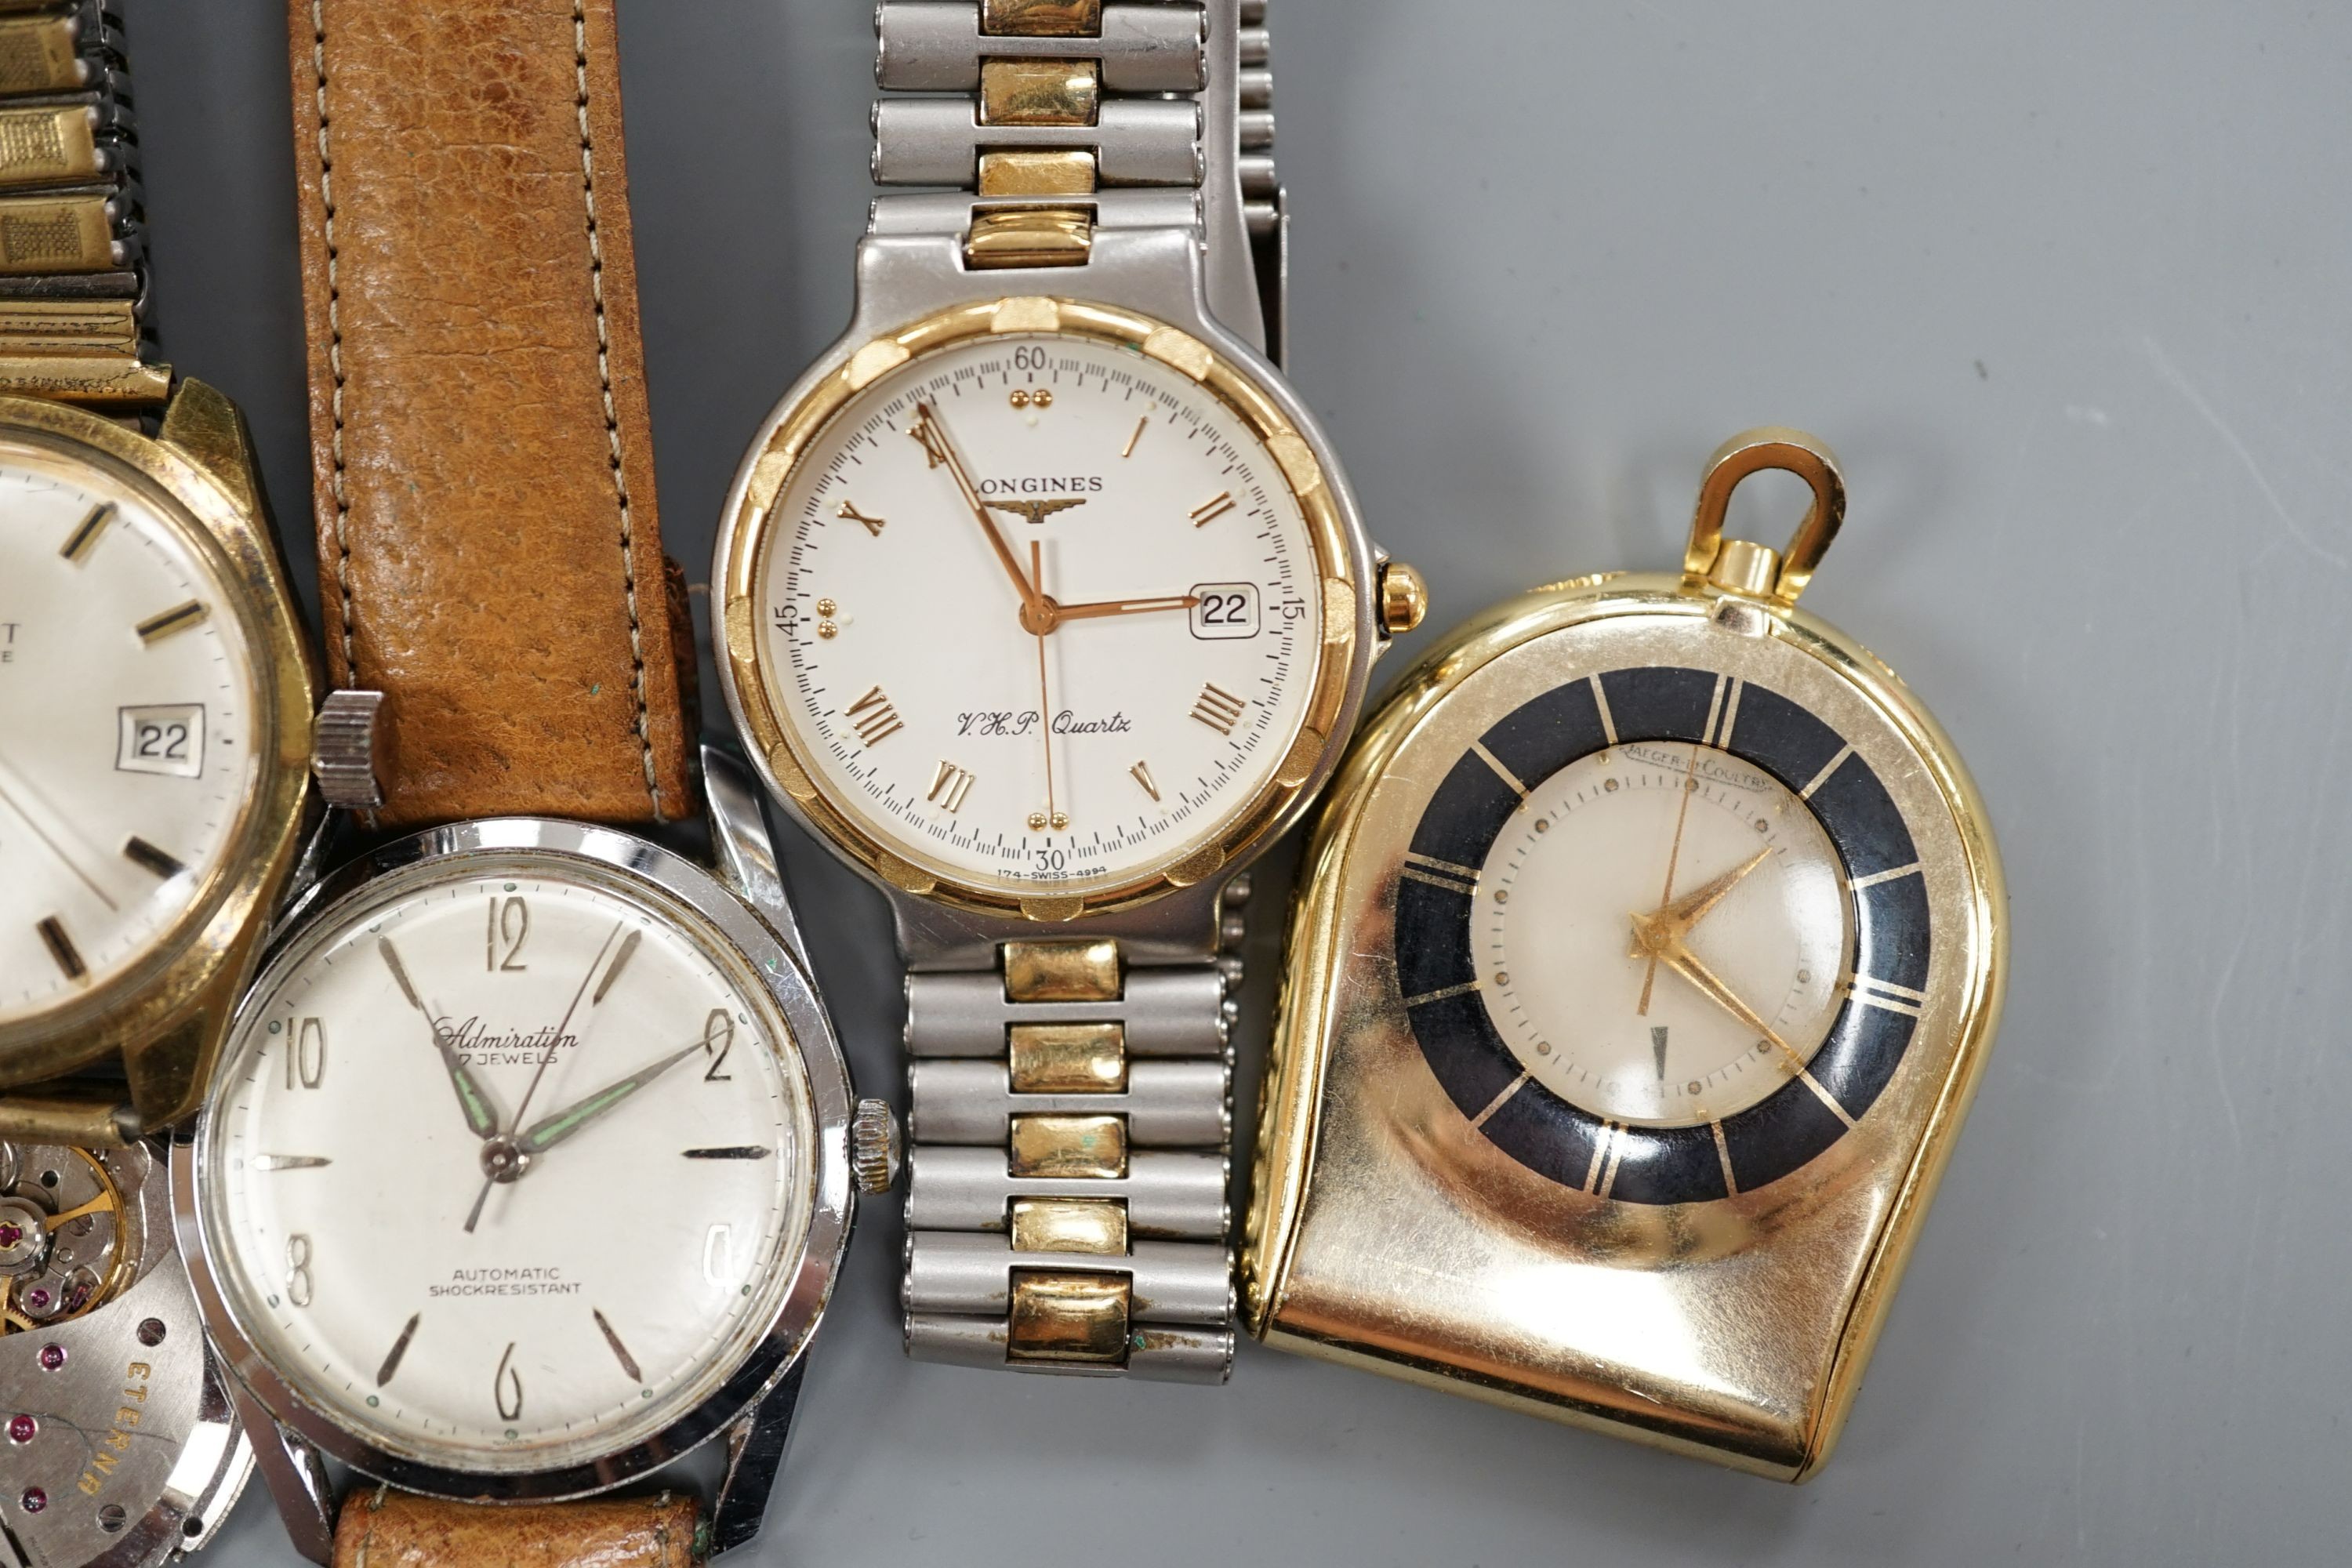 Three gentleman's wrist watches, Tissot, Longines VHP quartz and Admiration, an Eterna movement and a Jaeger LeCoultre travelling watch.